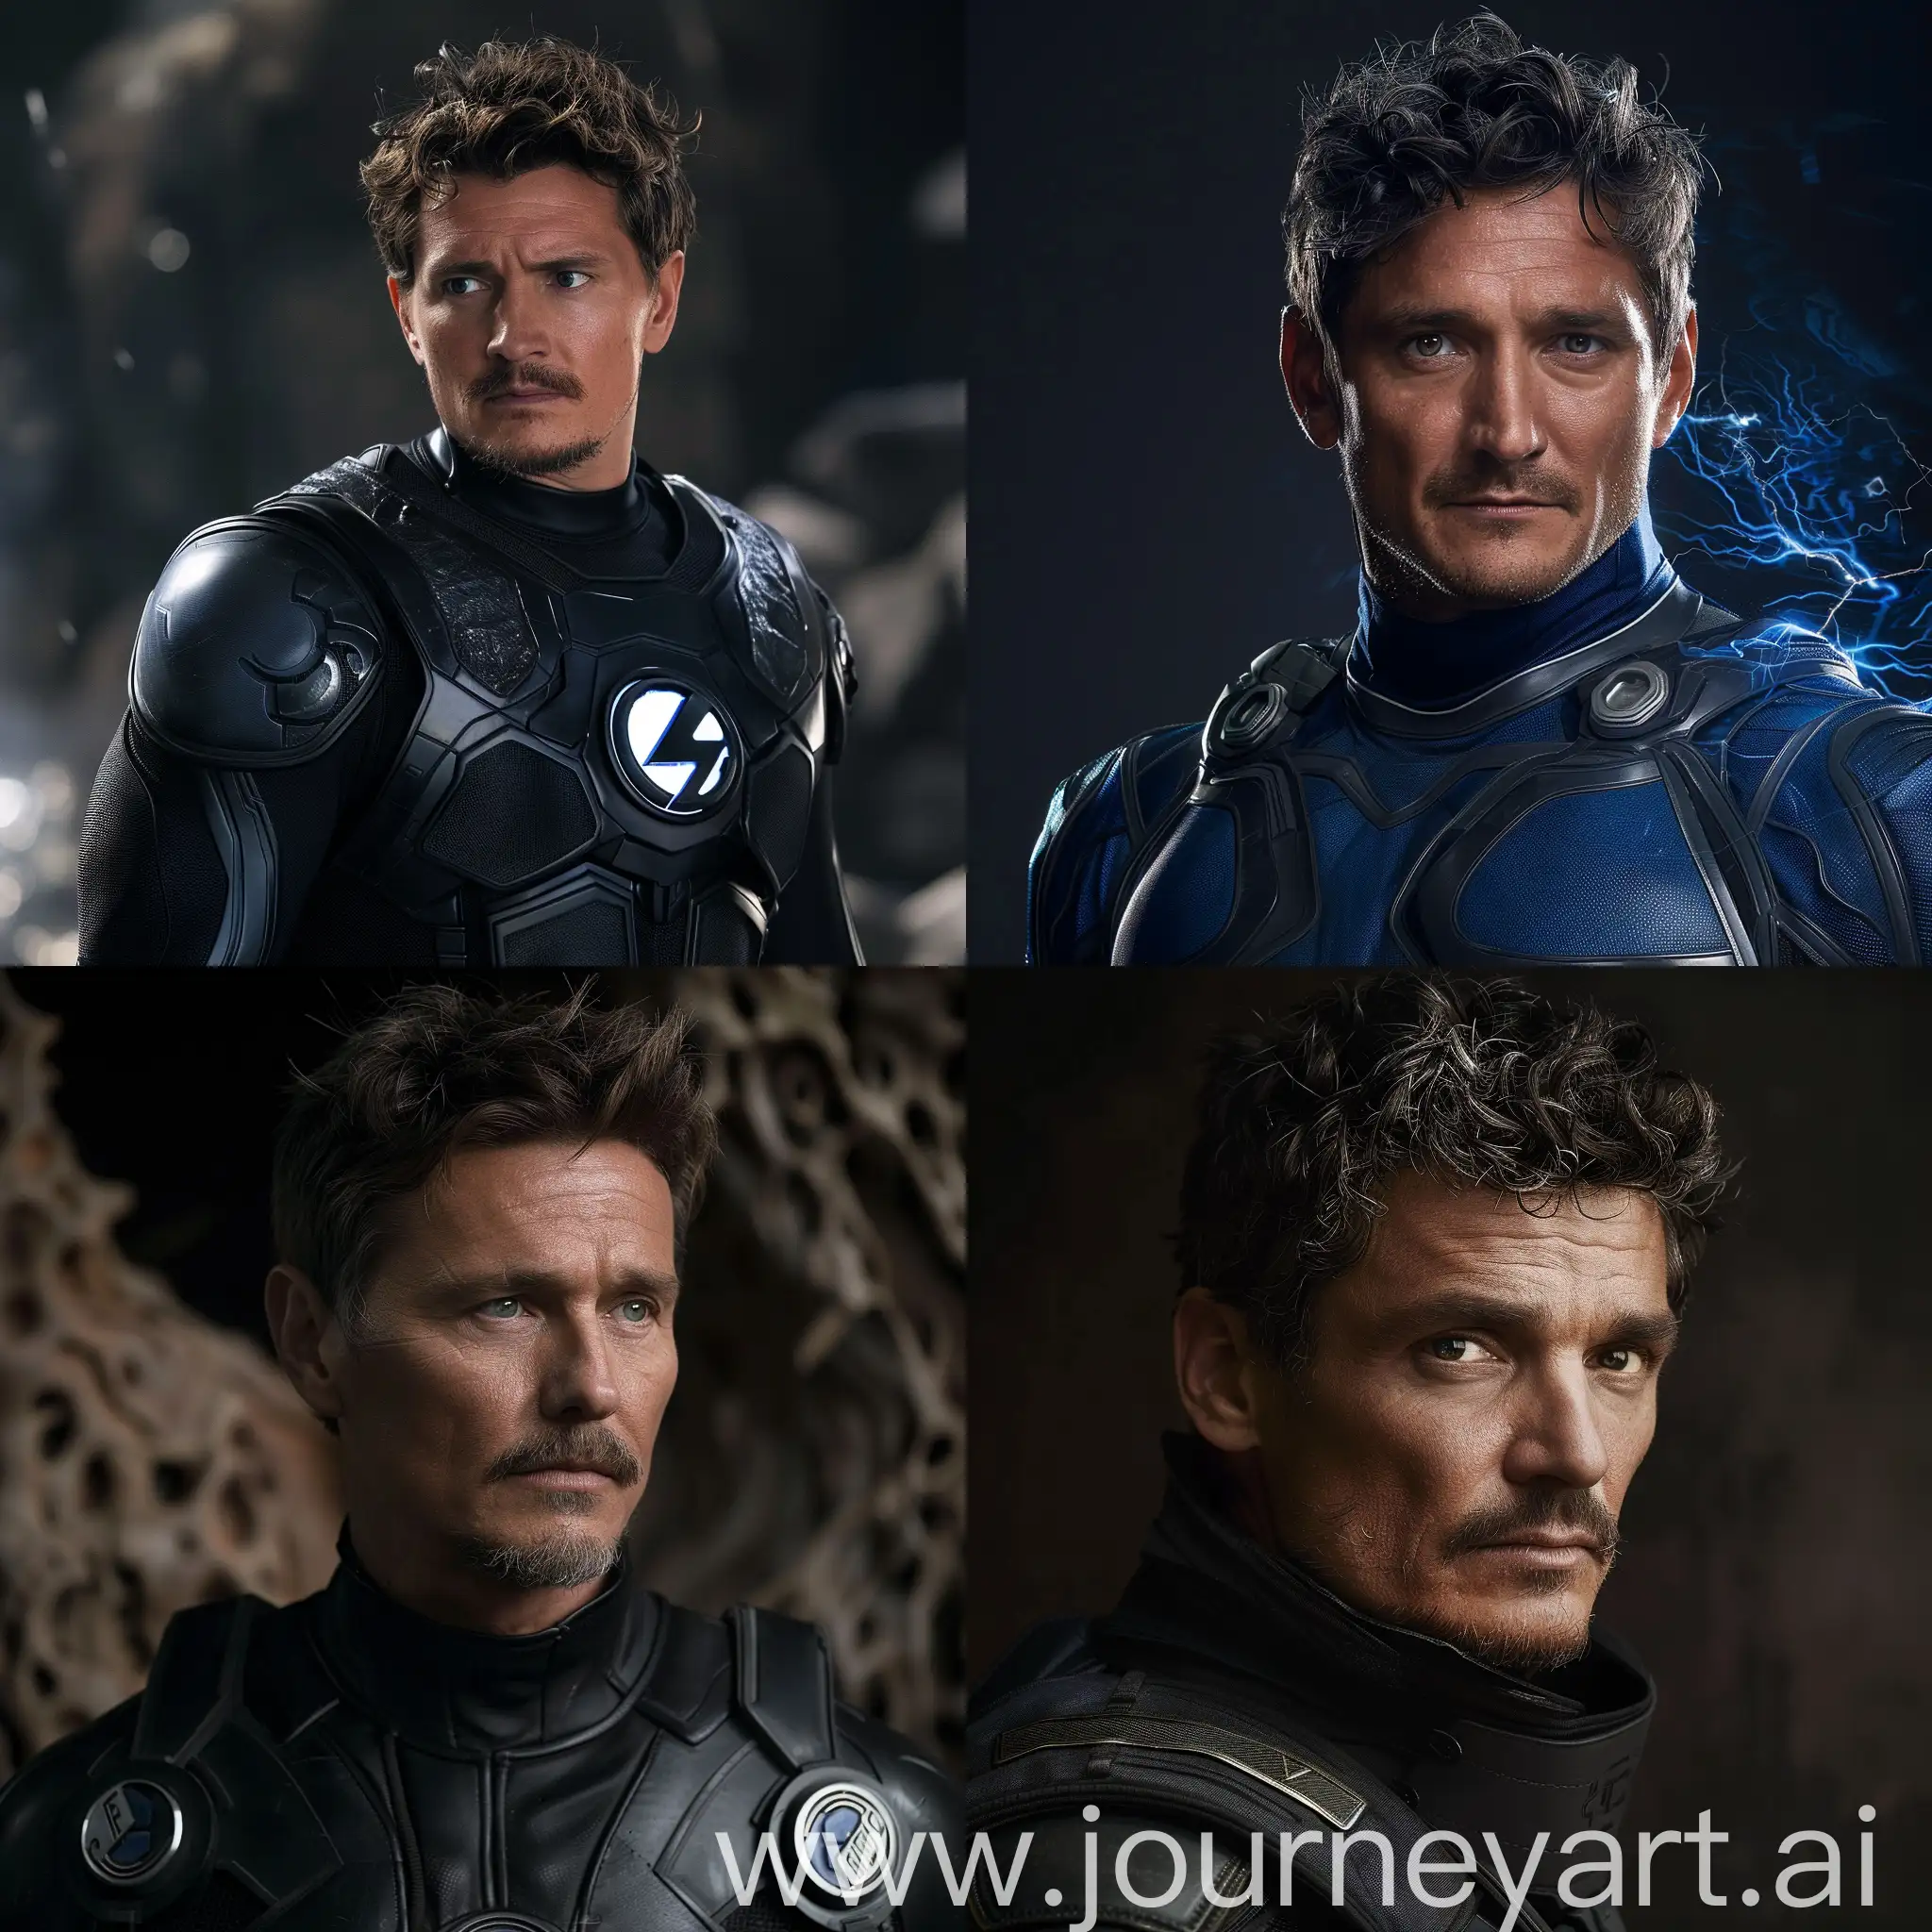 Pedro Pascal as Reed richards from fantastic four